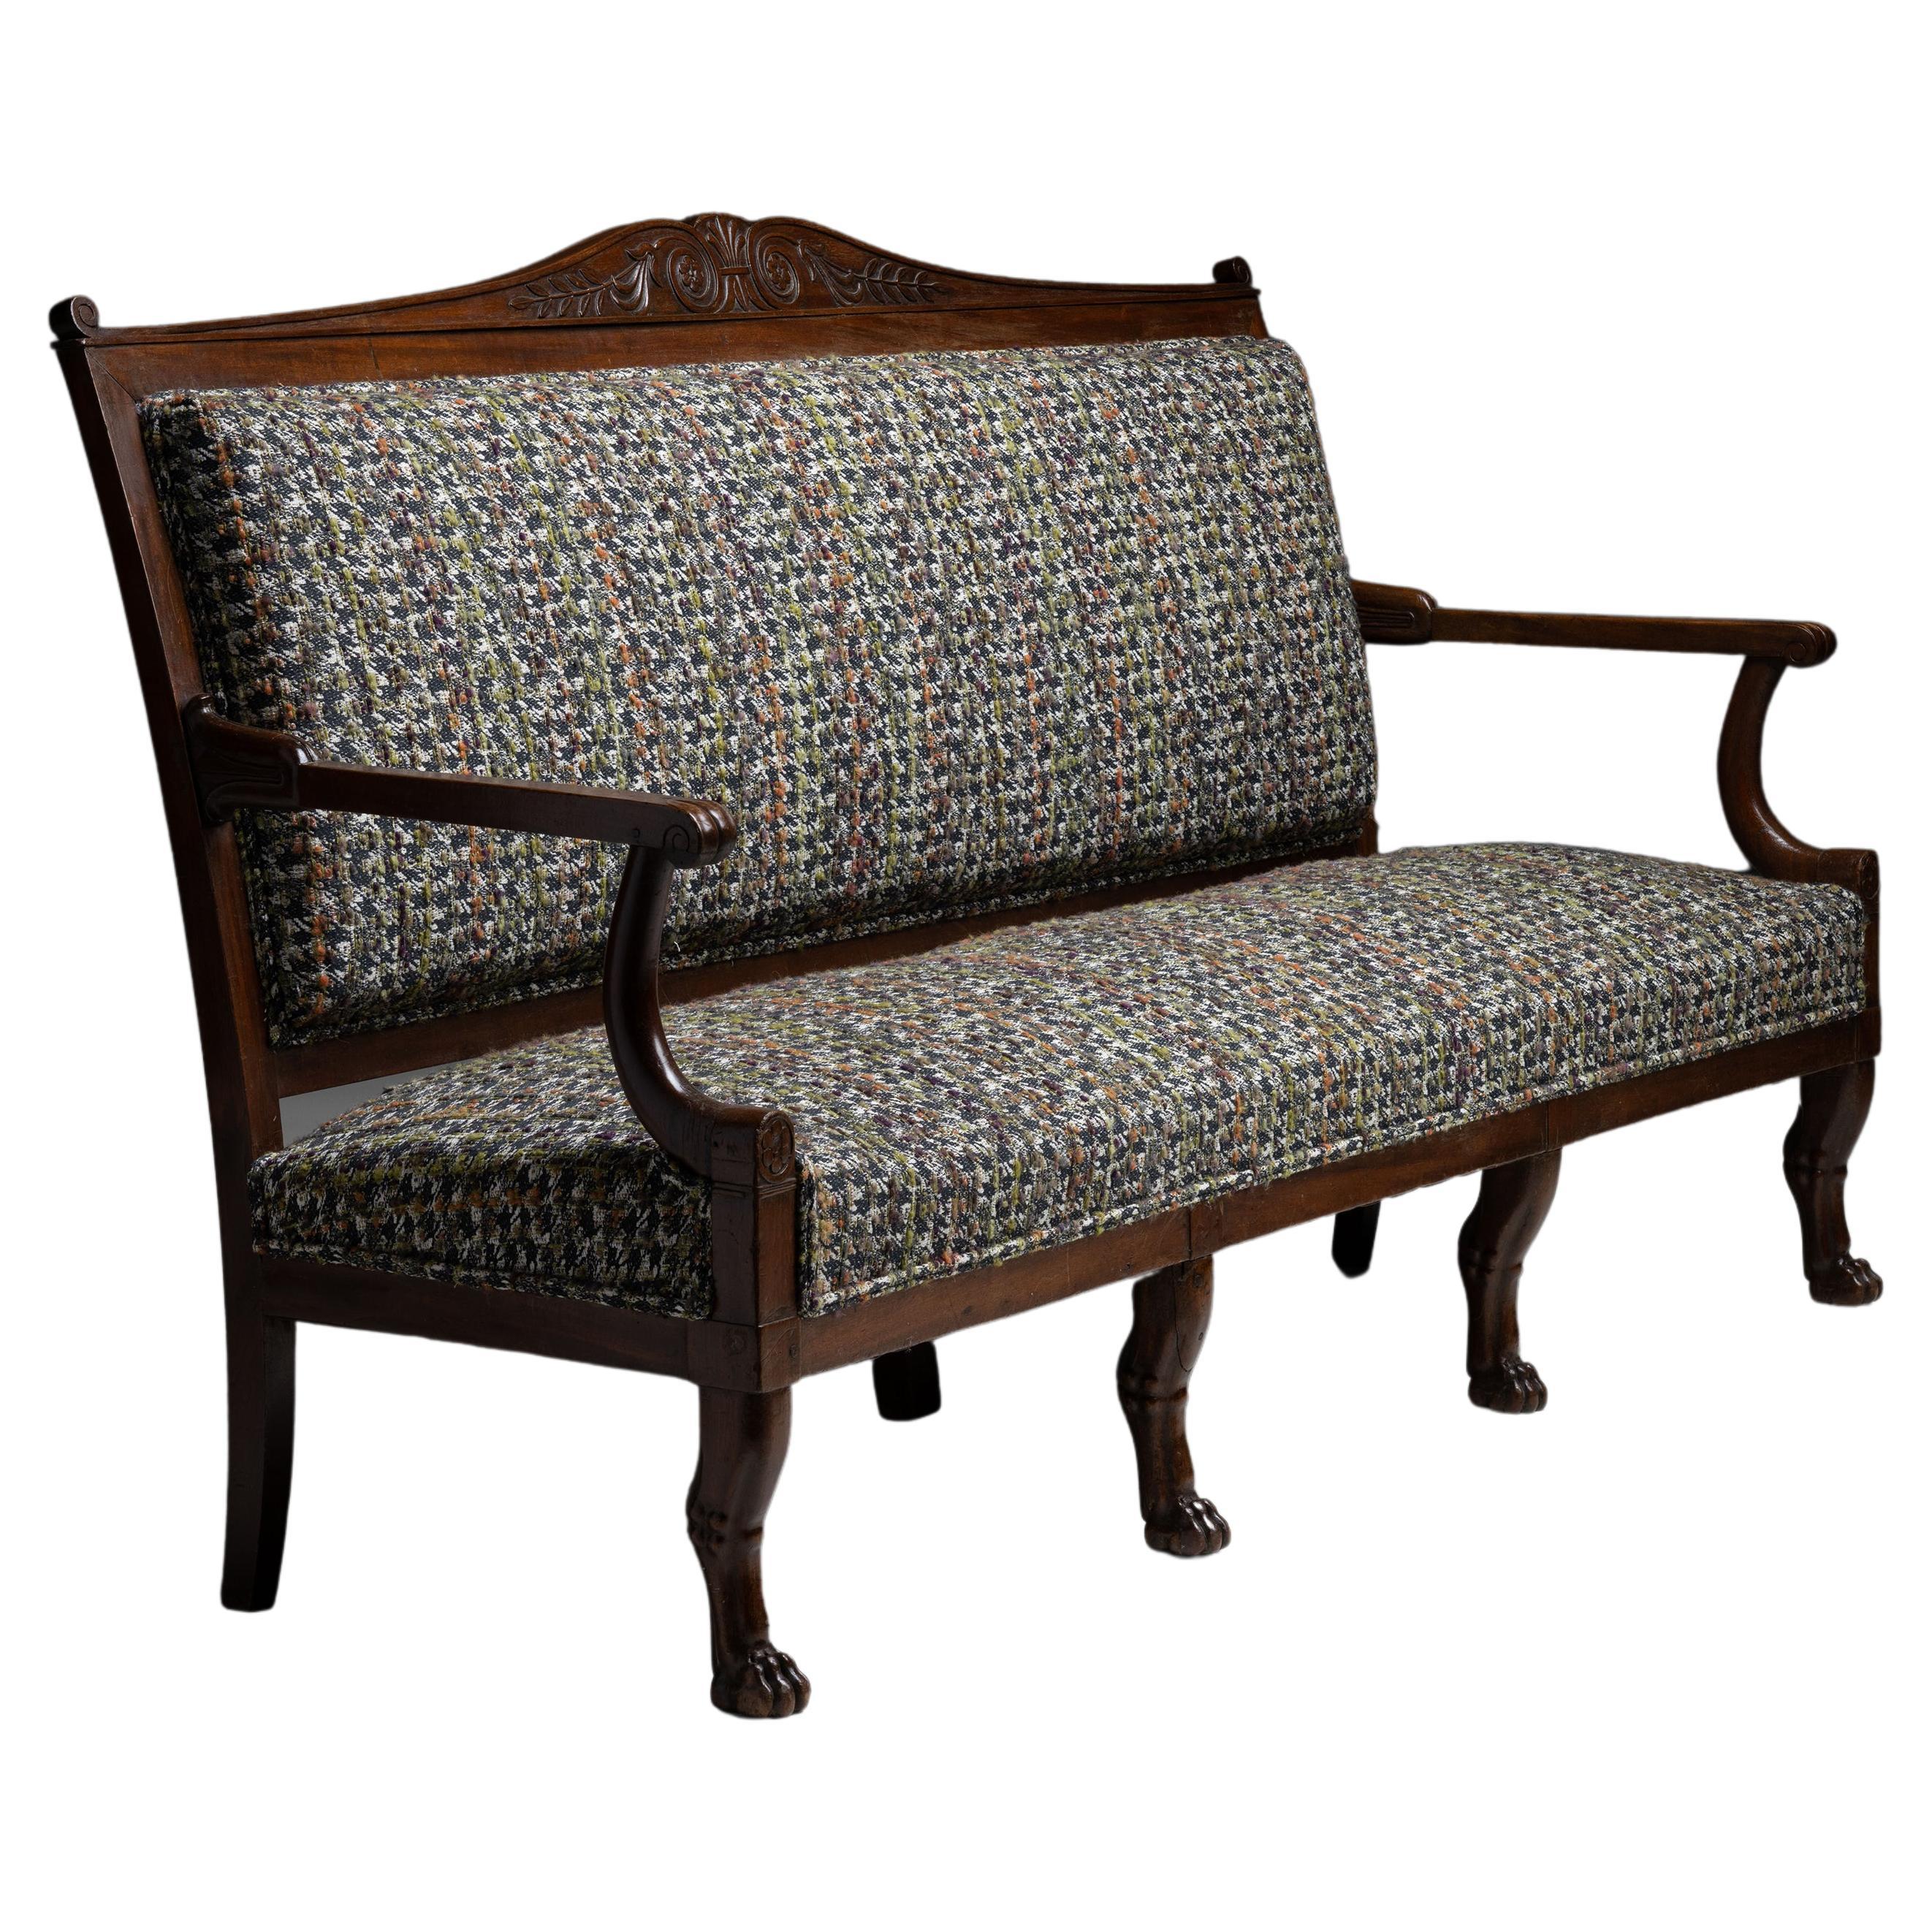 Empire Sofa in Textured Wool Blend, France, circa 1840 For Sale